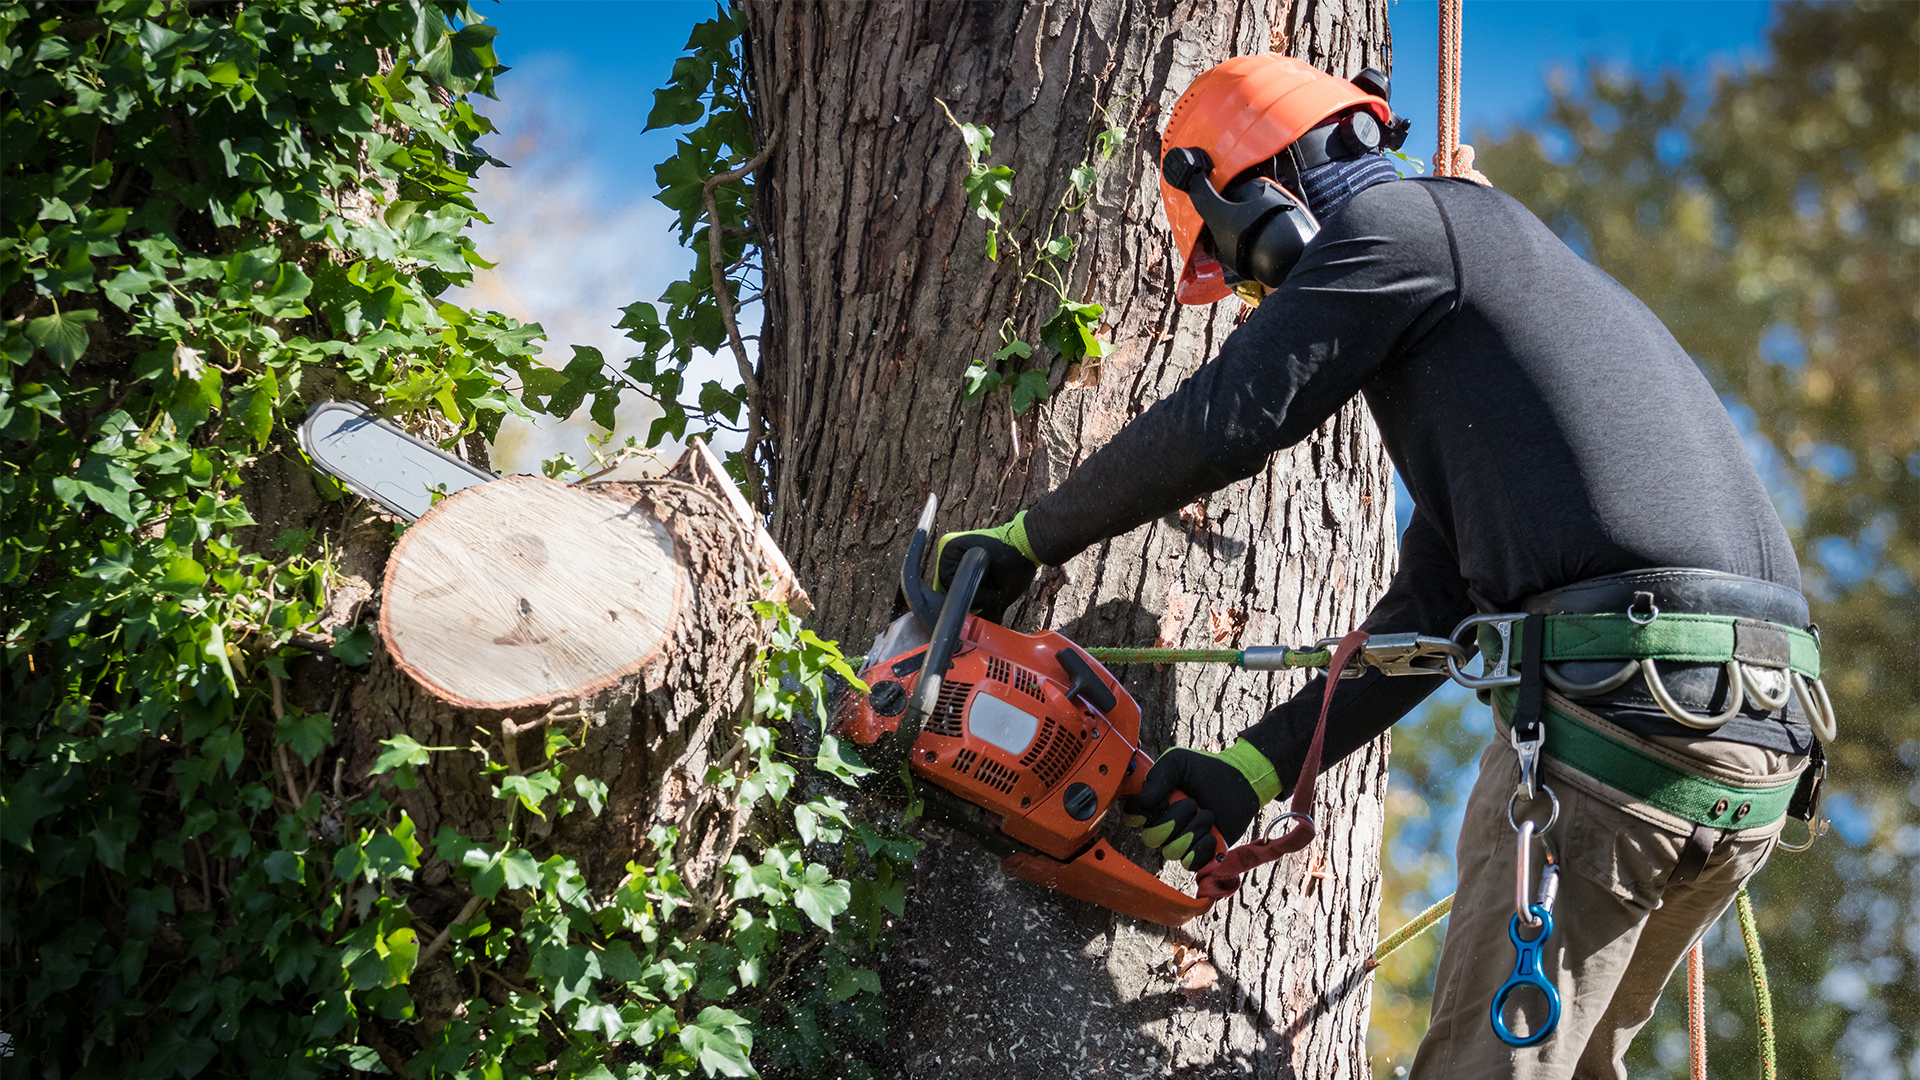 Man in safety harnesses and helmet cuts down large tree sections with chainsaw.